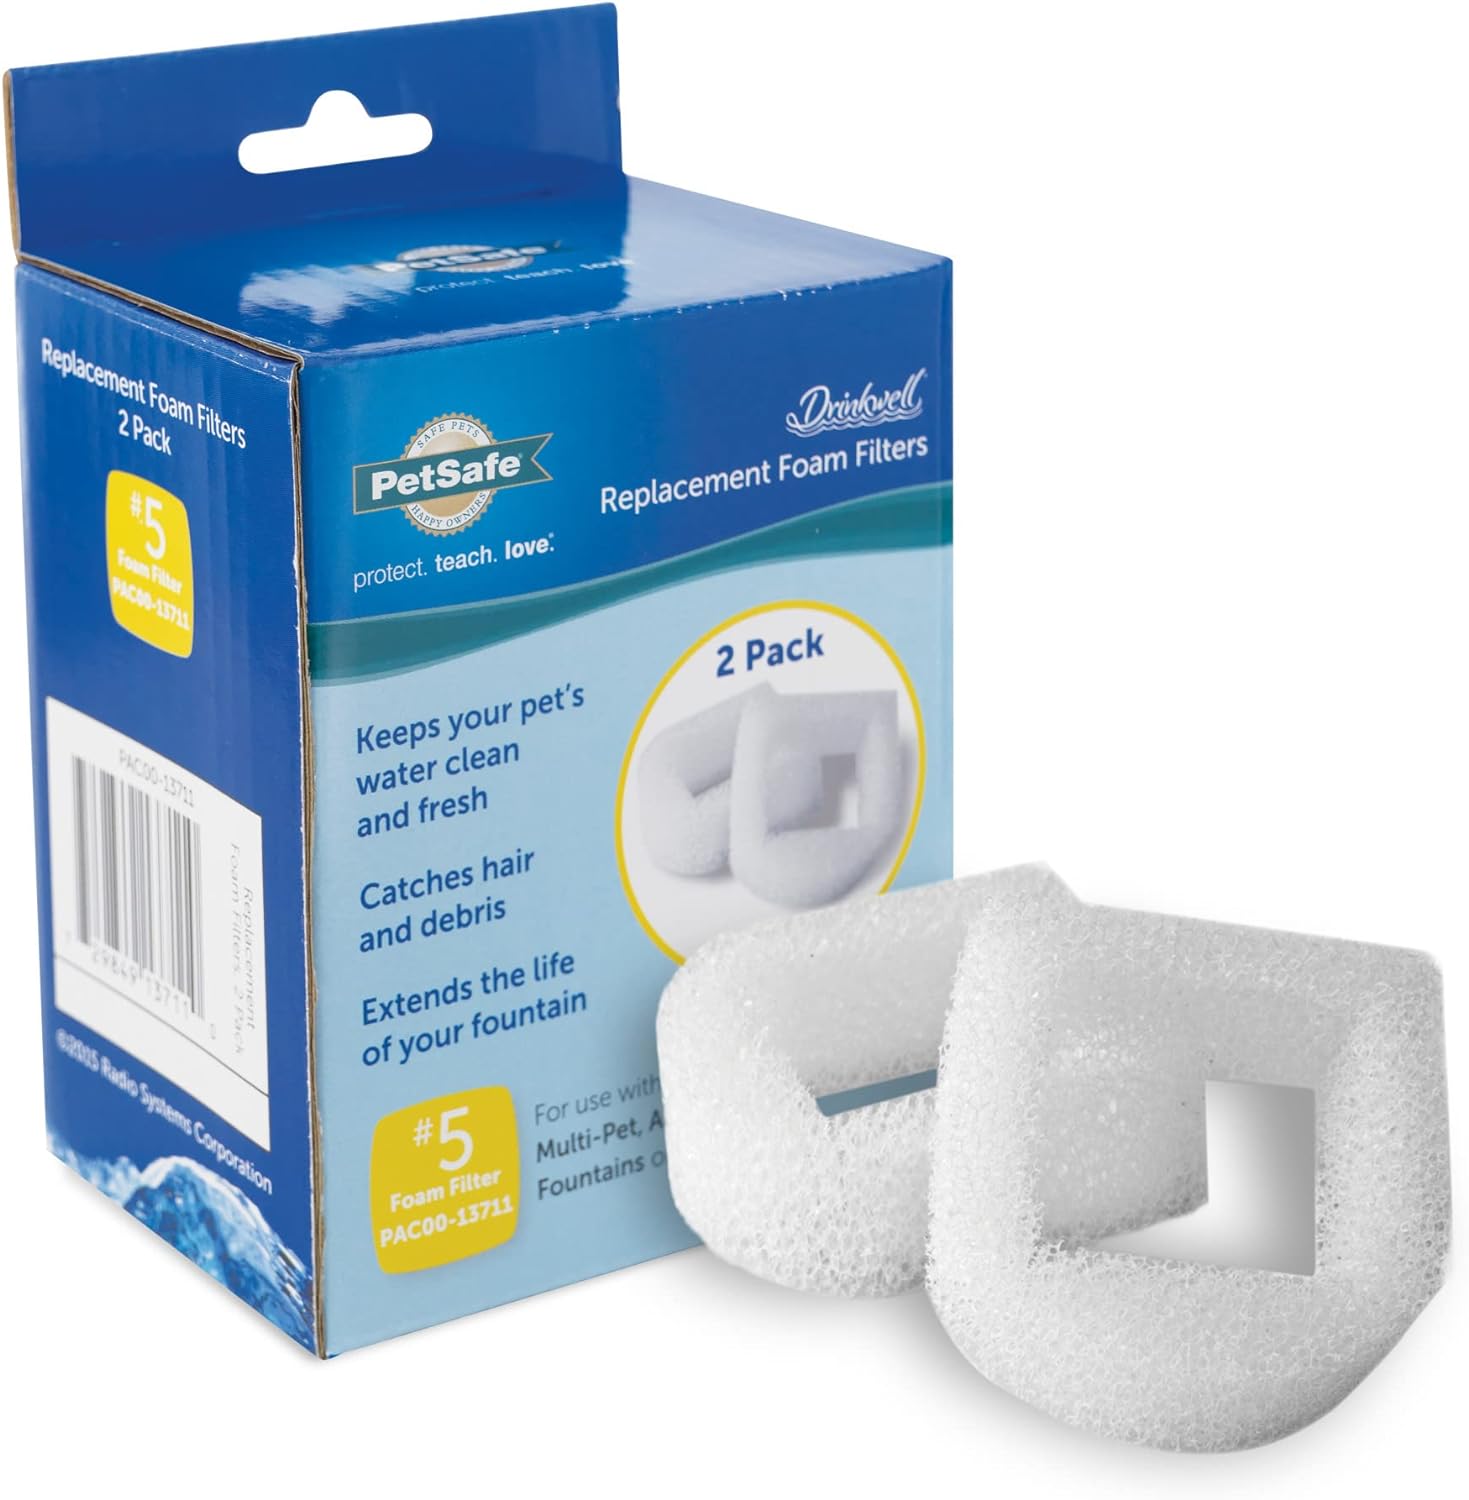 PetSafe Drinkwell Replacement Foam Filters - 2 Count Pack, Compatible with Ceramic and Stainless Steel Pet Fountains, PAC00-13711, White